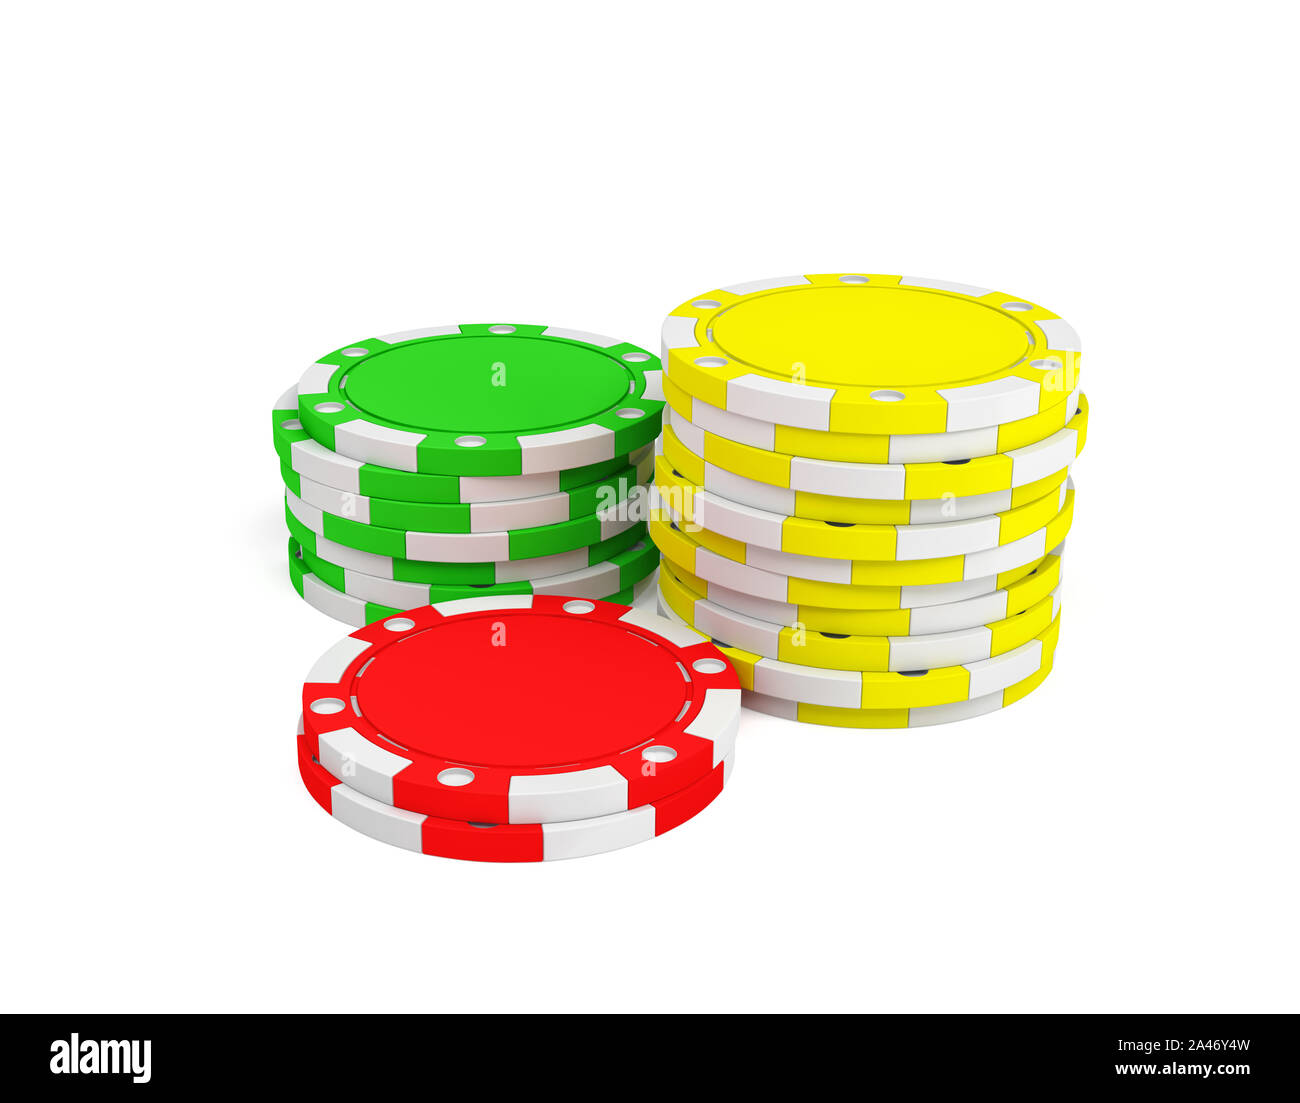 Croupier Cut Out Stock Images & Pictures - Alamy